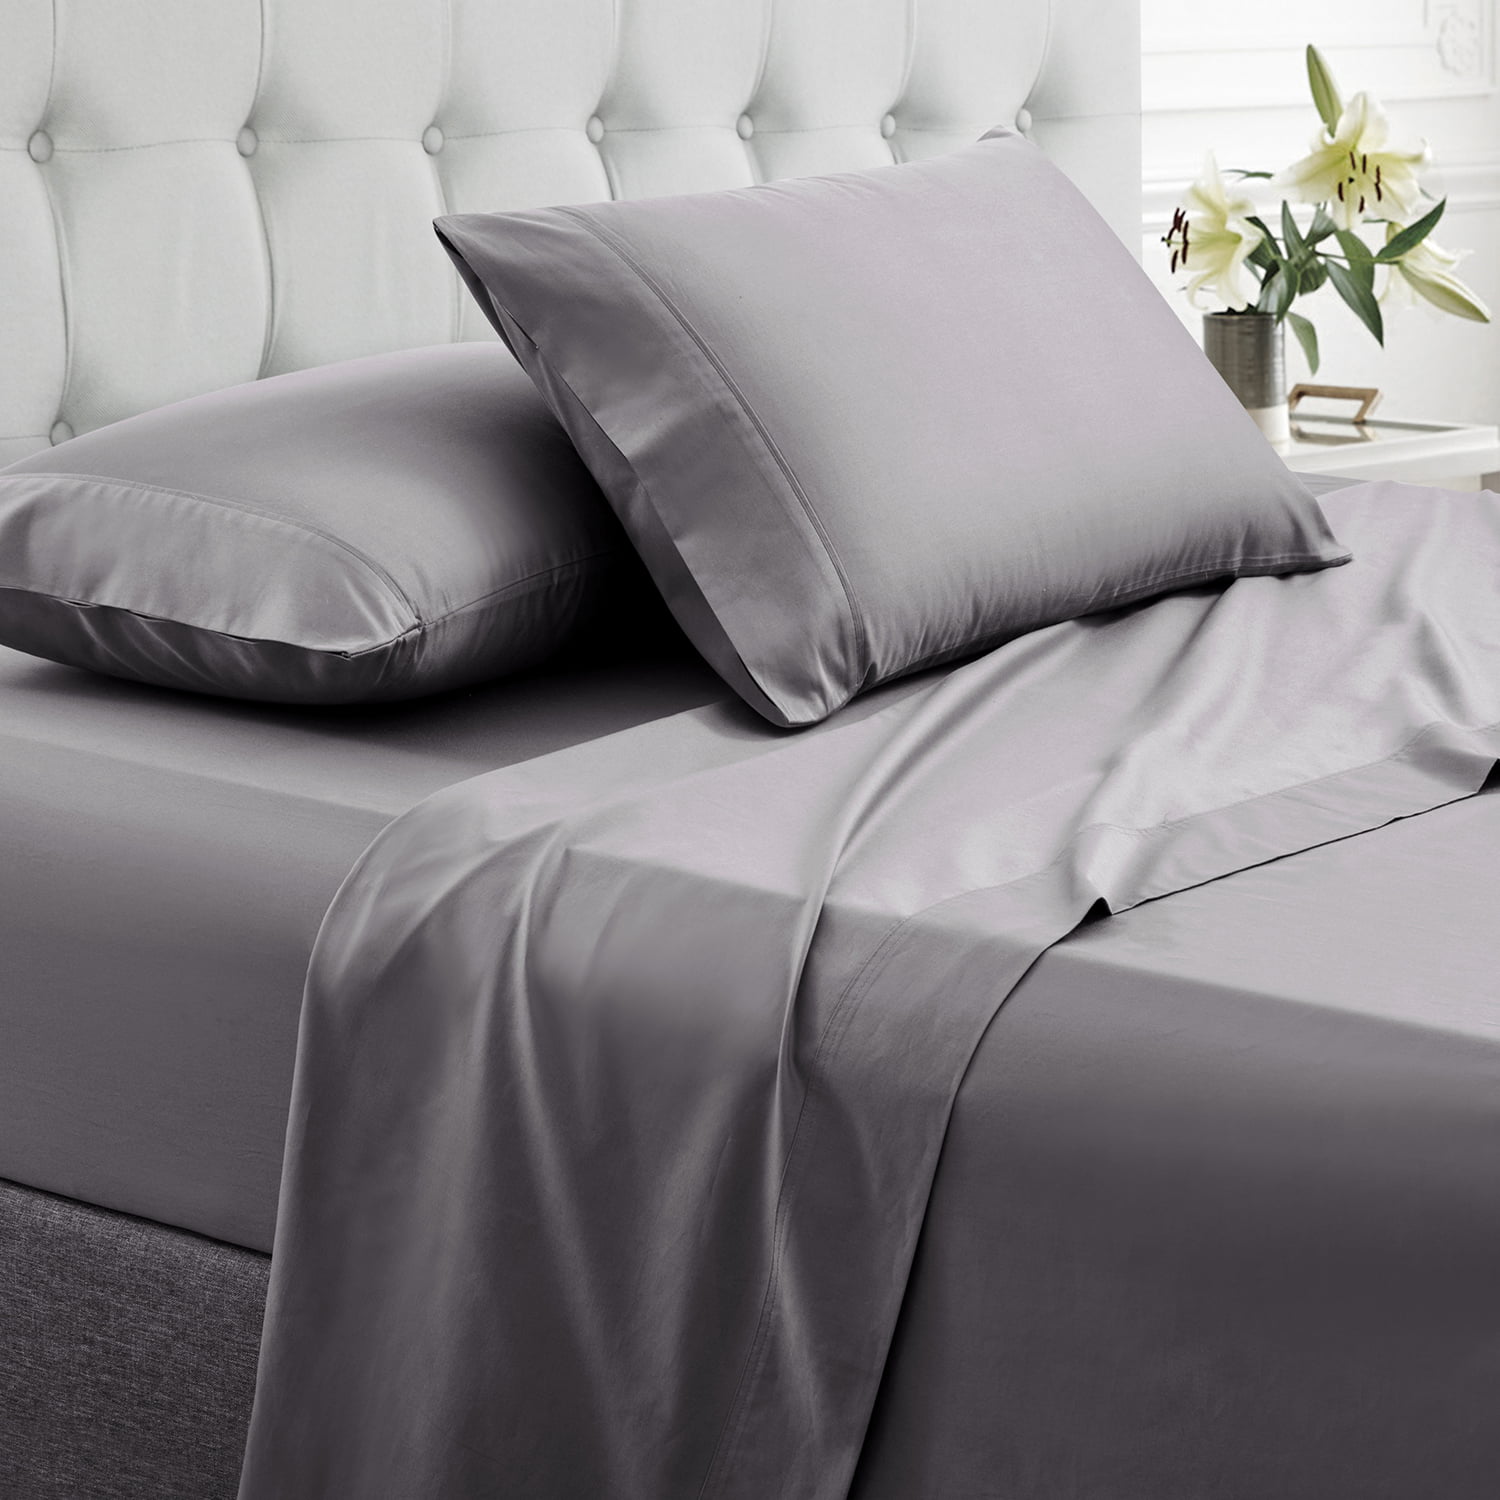 Details about  / 100/%Egyptian Cotton Pillow Bed Sheet Sets Dark Grey Sheets 400 Tc with Easy Fit